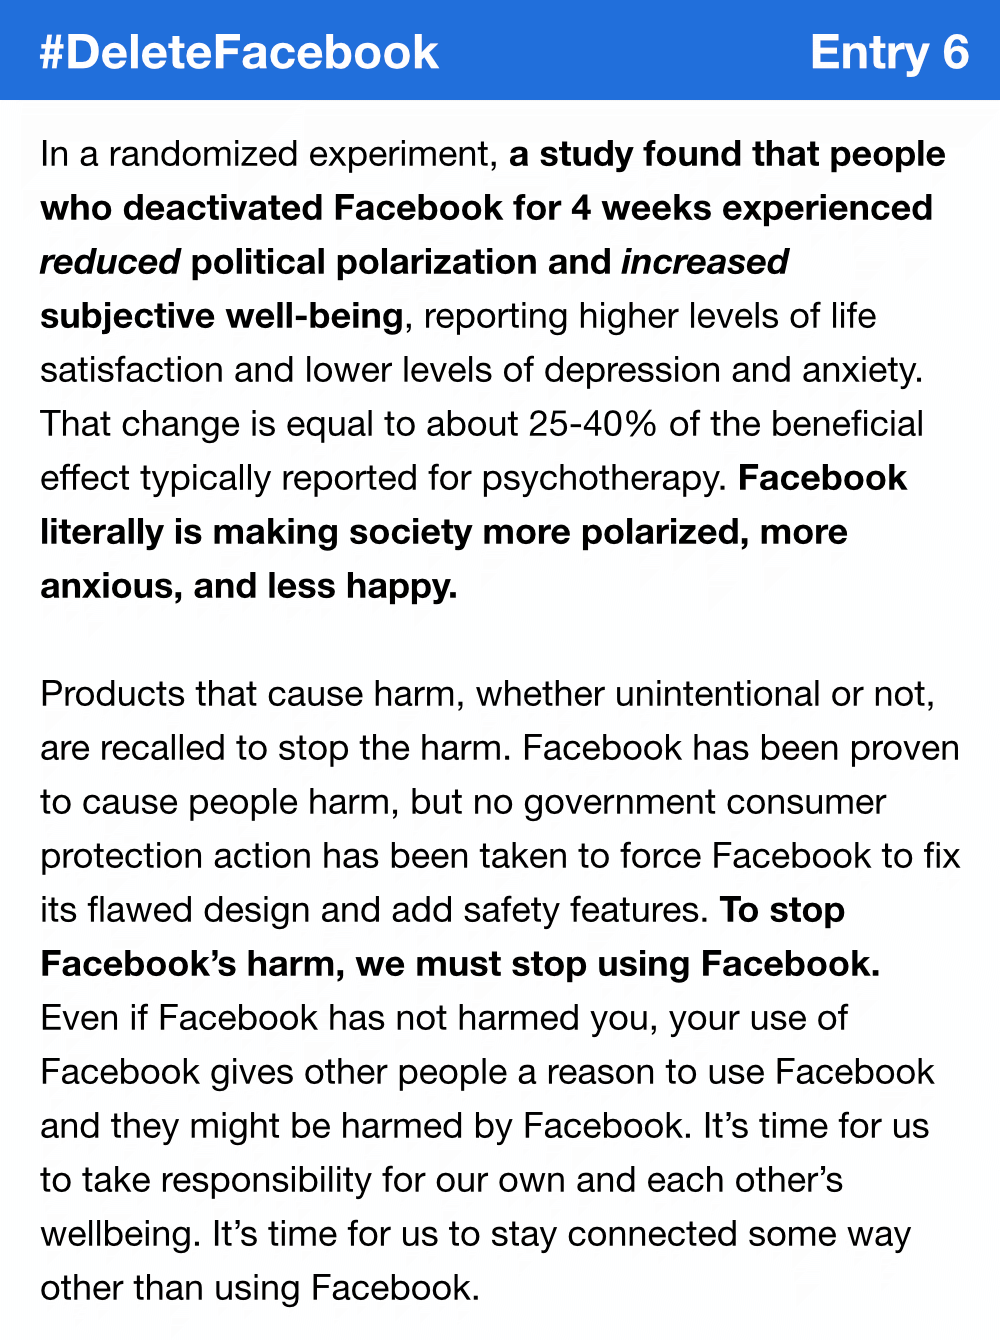 In a randomized experiment, a study found that people who deactivated Facebook for 4 weeks experienced reduced political polarization and increased subjective well-being, reporting higher levels of life satisfaction and lower levels of depression and anxiety. That change is equal to about 25-40% of the beneficial effect typically reported for psychotherapy. Facebook literally is making society more polarized, more anxious, and less happy. Products that cause harm, whether unintentional or not, are recalled to stop the harm. Facebook has been proven to cause people harm, but no government consumer protection action has been taken to force Facebook to fix its flawed design and add safety features. To stop Facebook’s harm, we must stop using Facebook. Even if Facebook has not harmed you, your use of Facebook gives other people a reason to use Facebook and they might be harmed by Facebook. It’s time for us to take responsibility for our own and each other’s wellbeing. It’s time for us to stay connected some way other than using Facebook.